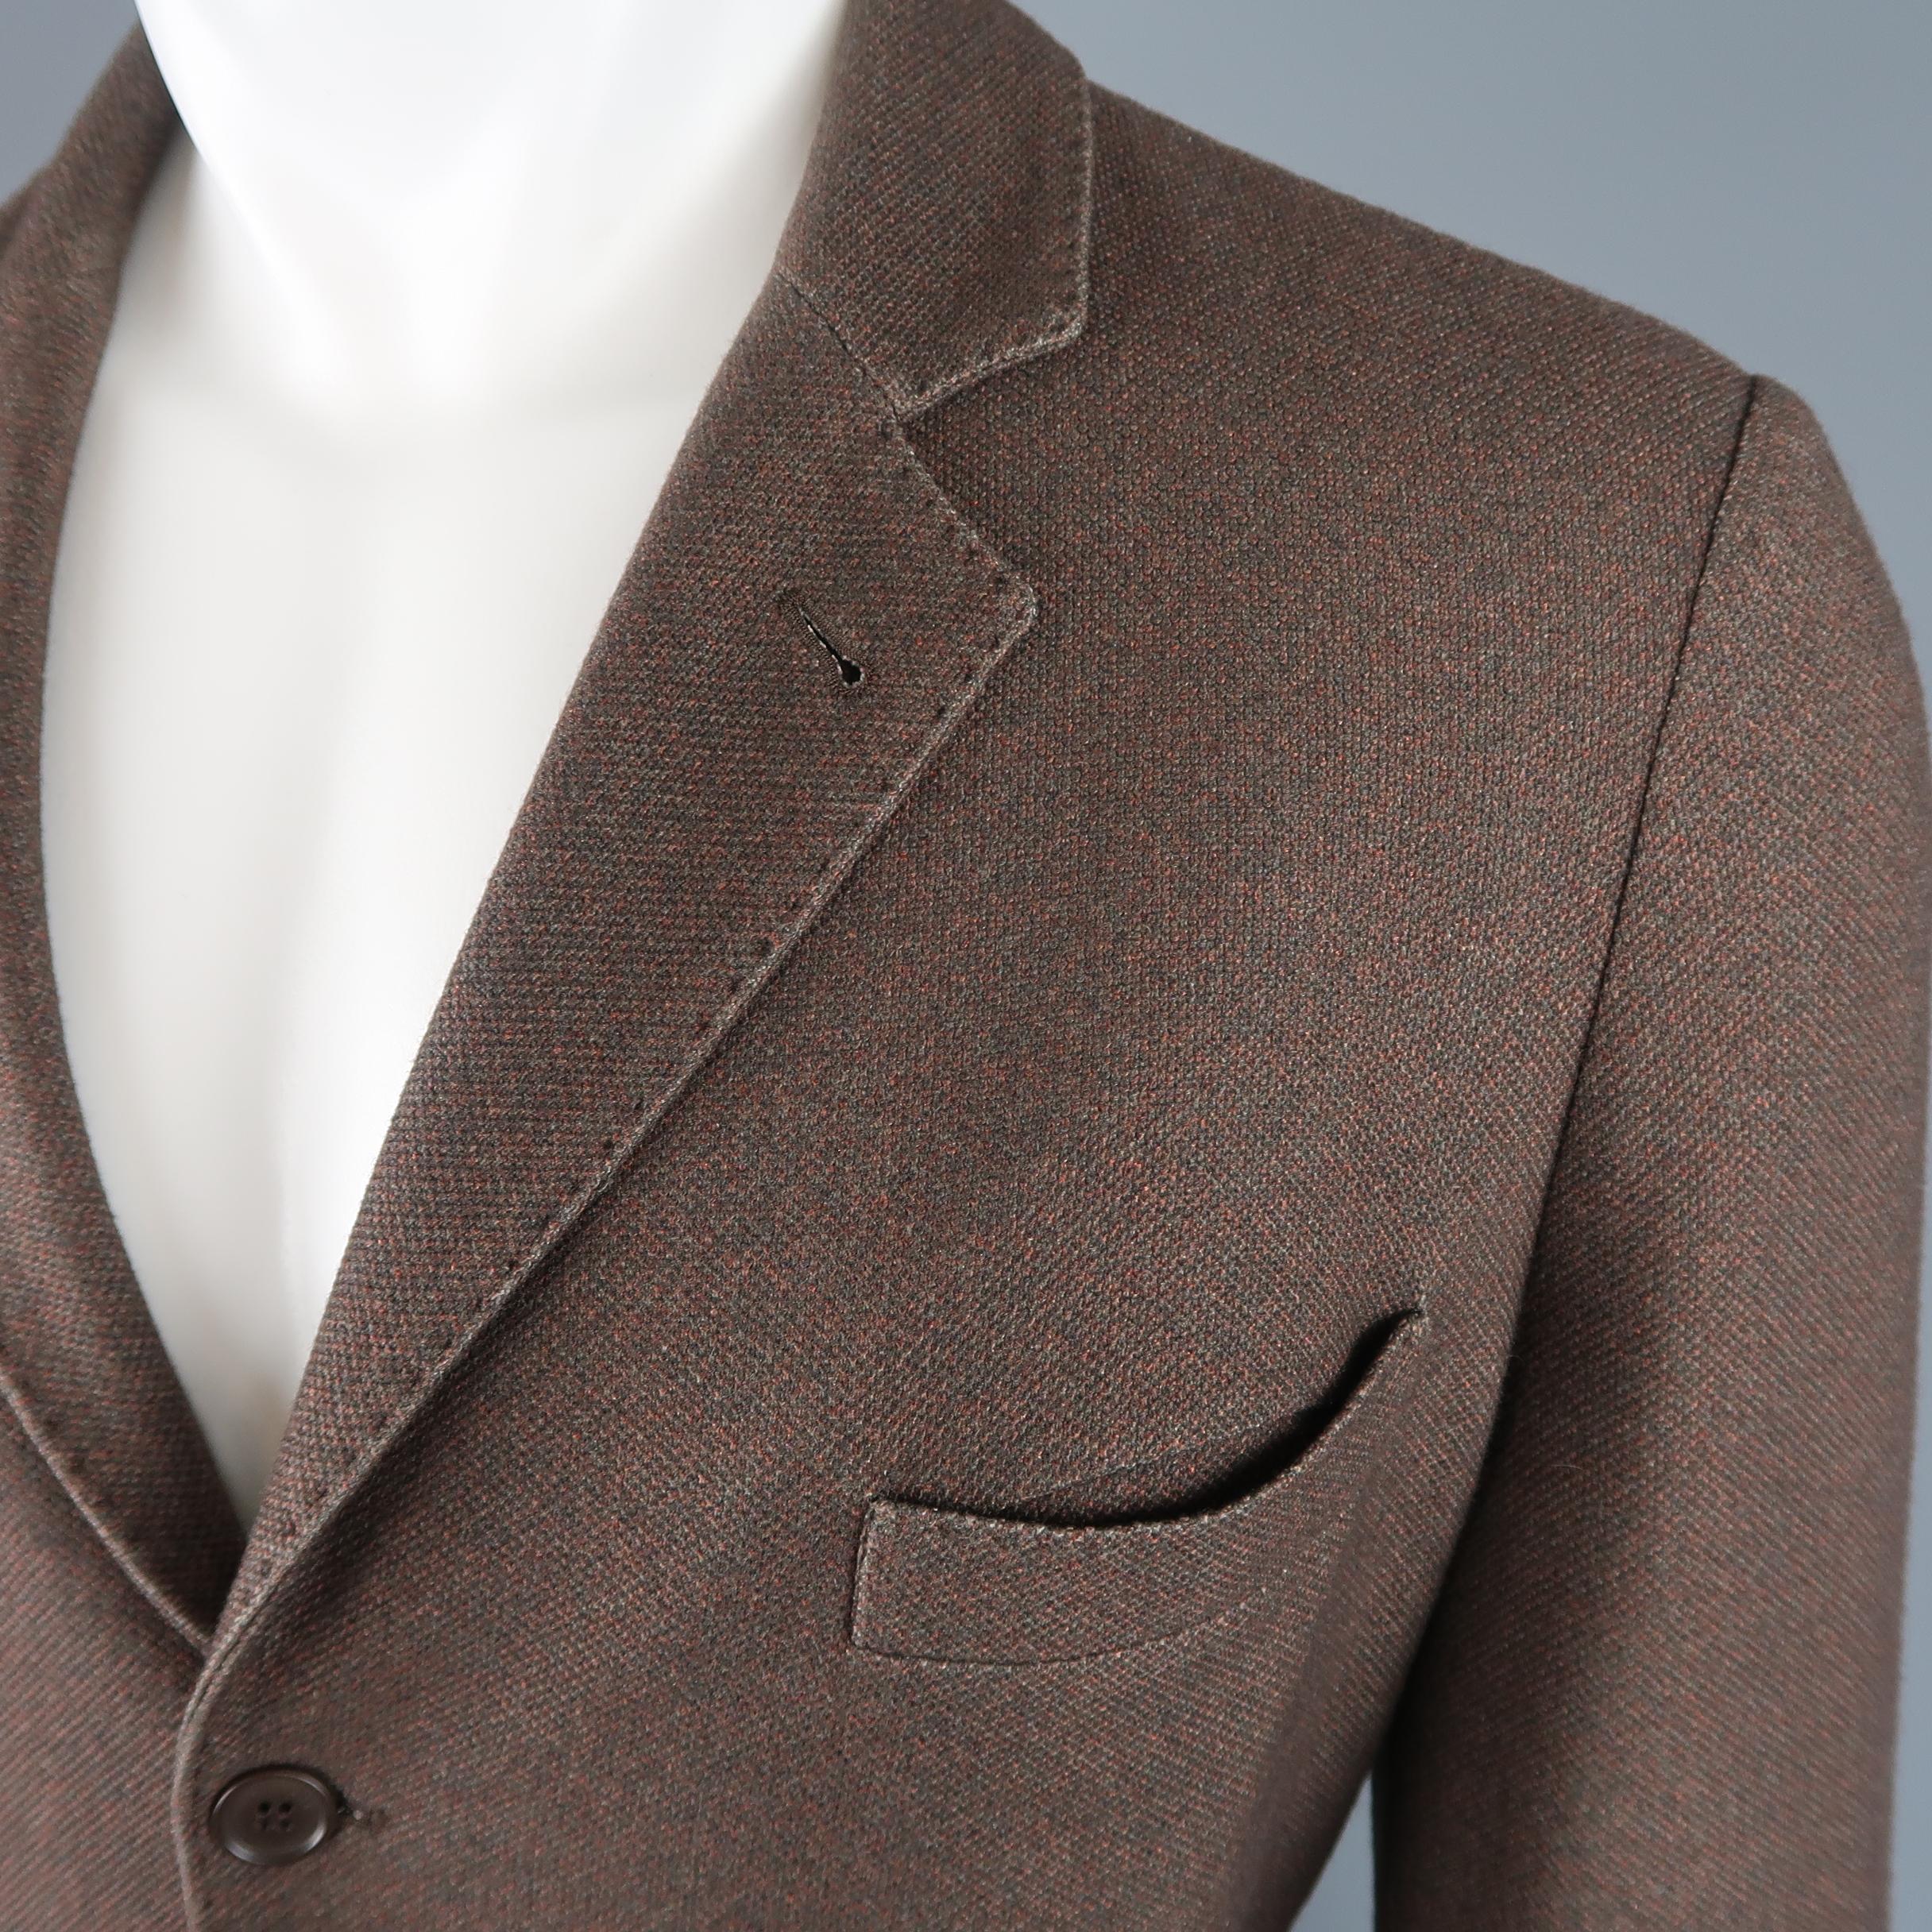 LORO PIANA soft shoulder, single breasted  sport coat comes in heather textured silk cashmere knit with a notch lapel, three button front, suede elbow pads, functional button cuffs, and patch pockets. Made in Italy.
 
Good Pre-Owned